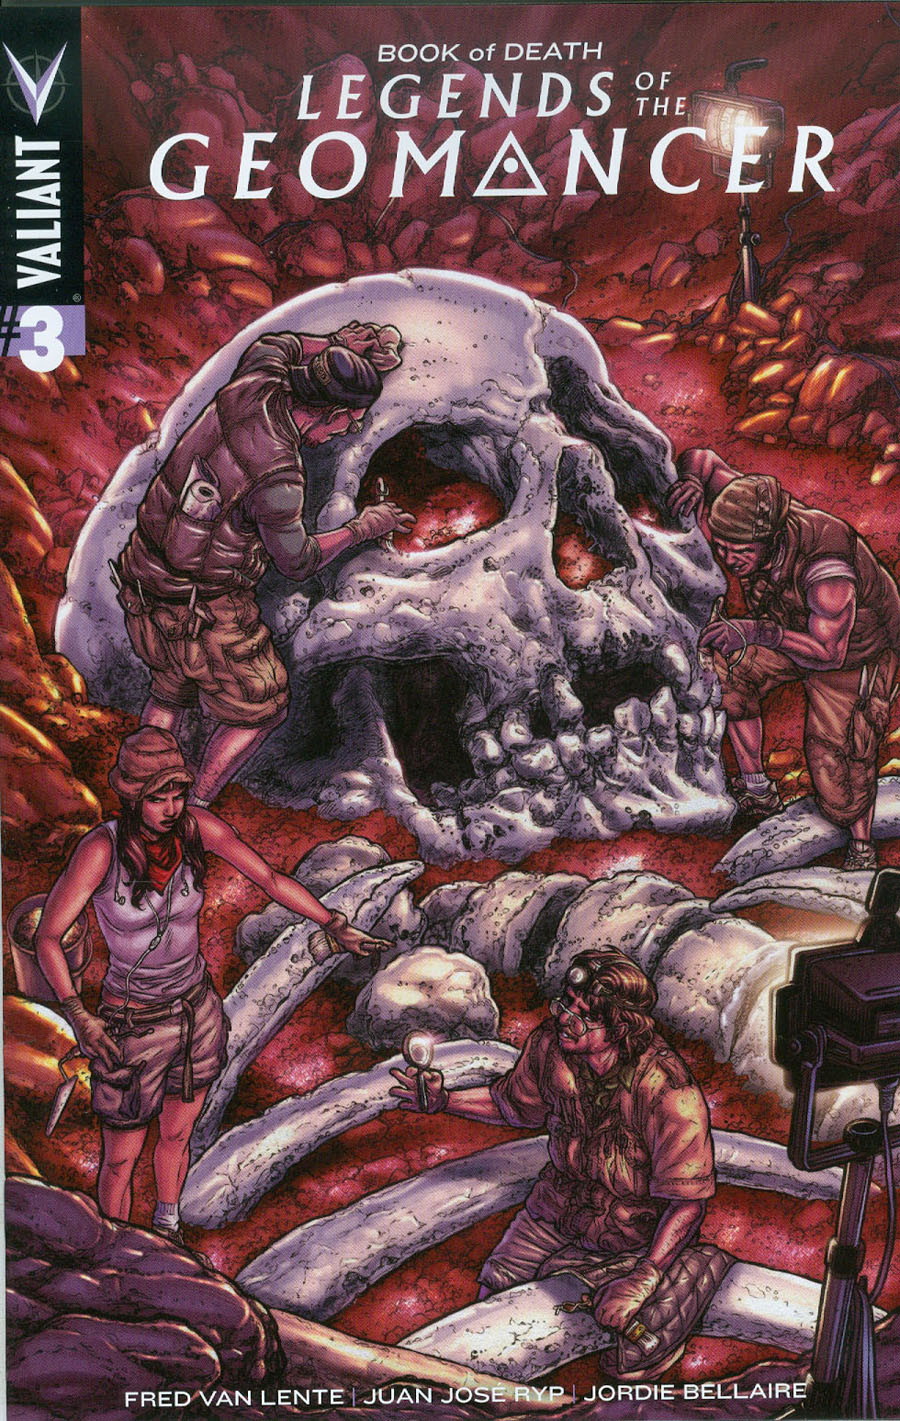 Book Of Death Legends Of The Geomancer #3